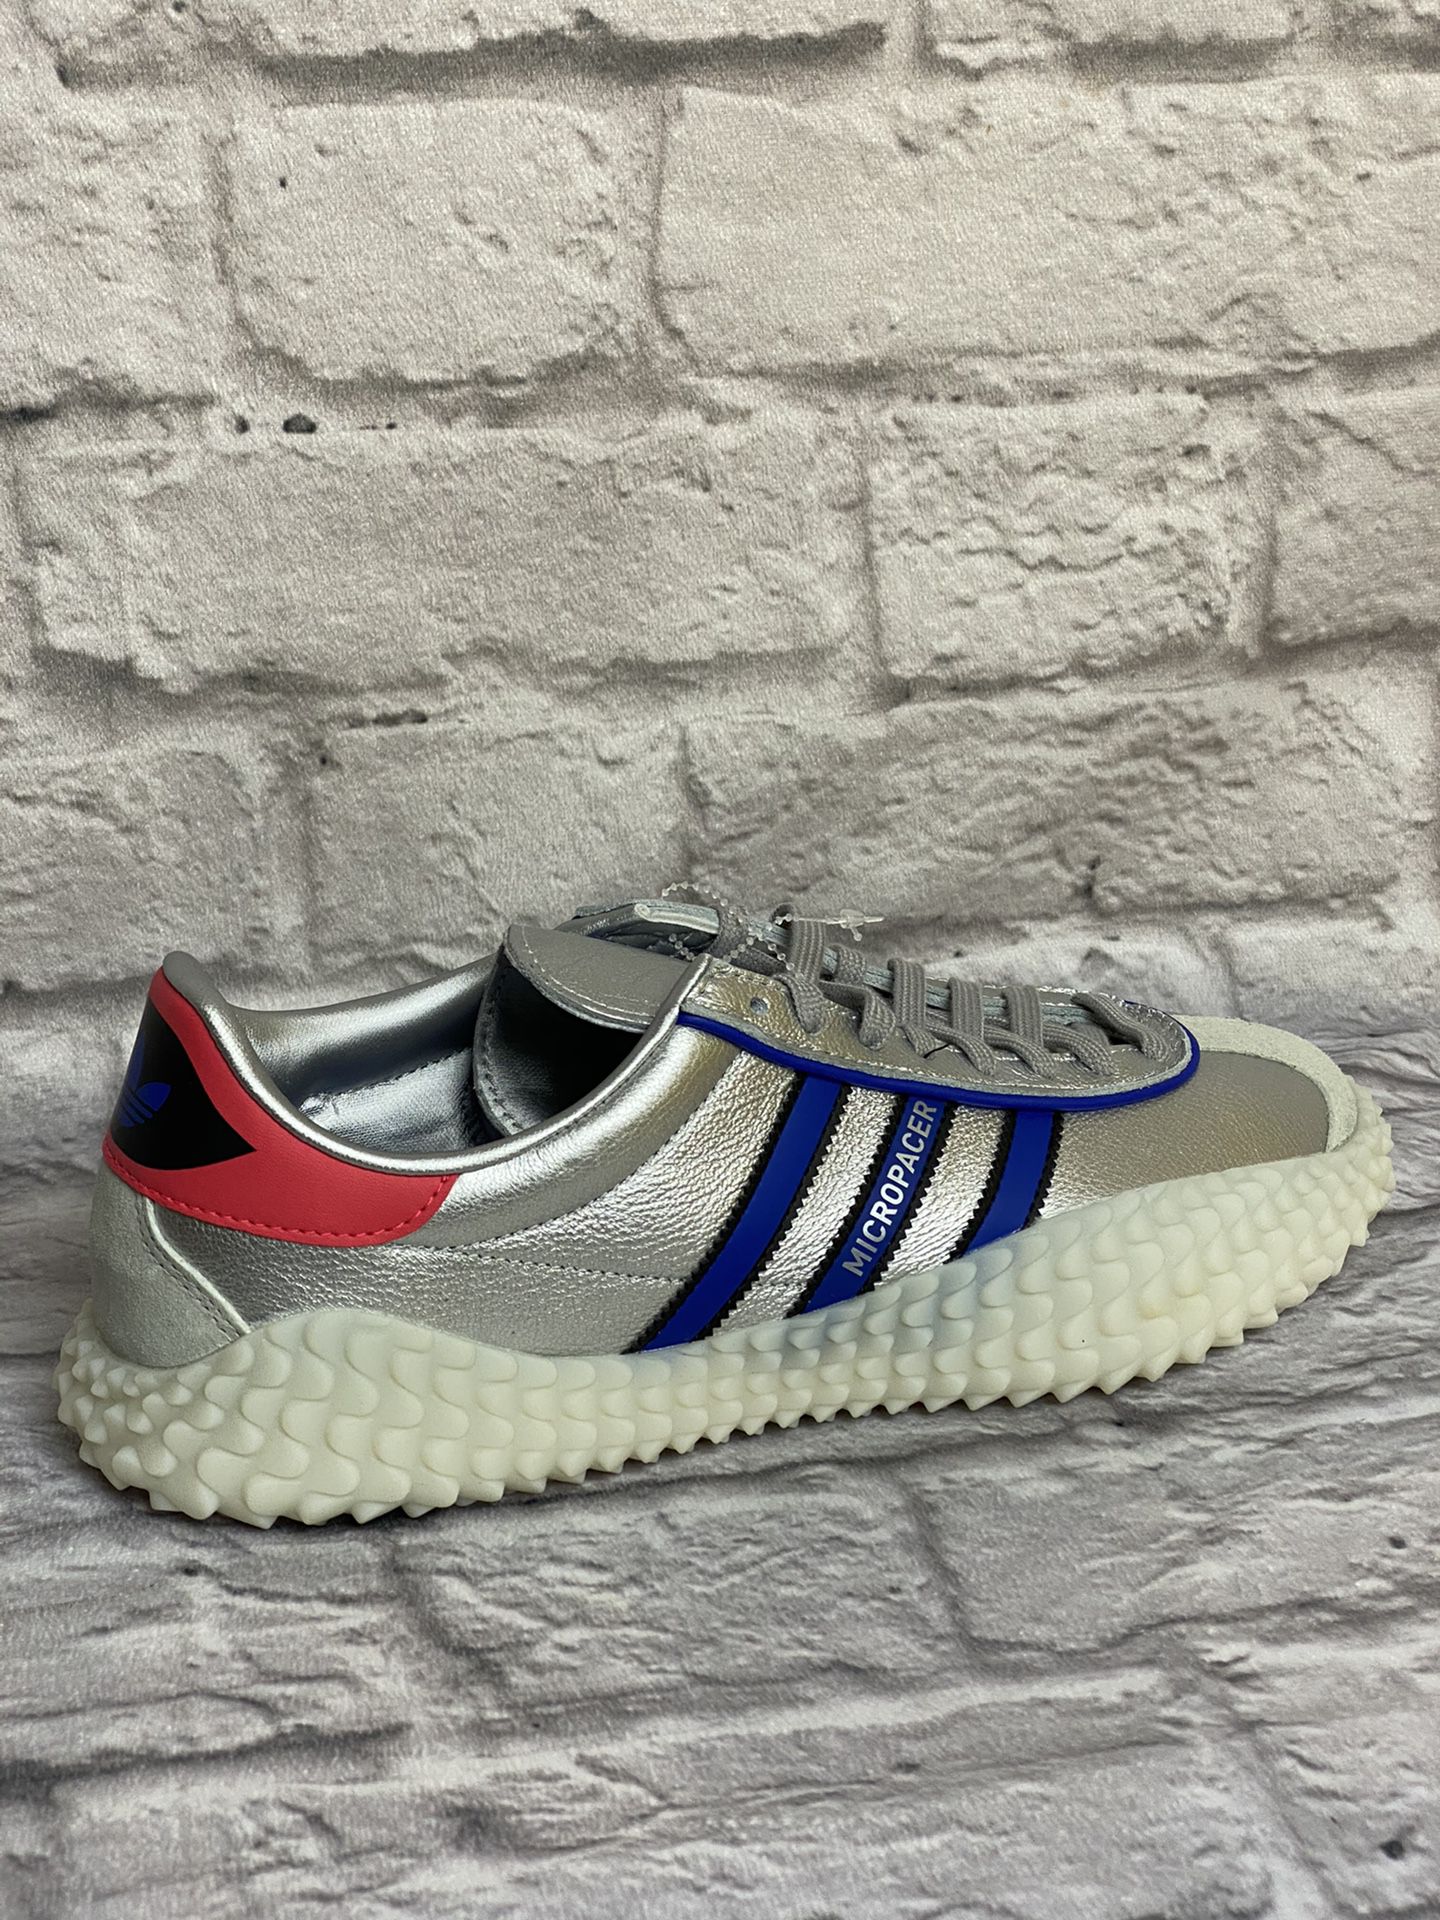 Adidas Origals Country x Kamanda Micropacer Sneaker Shoes Sz 10 Men’s New  for Sale in Chino, CA - OfferUp